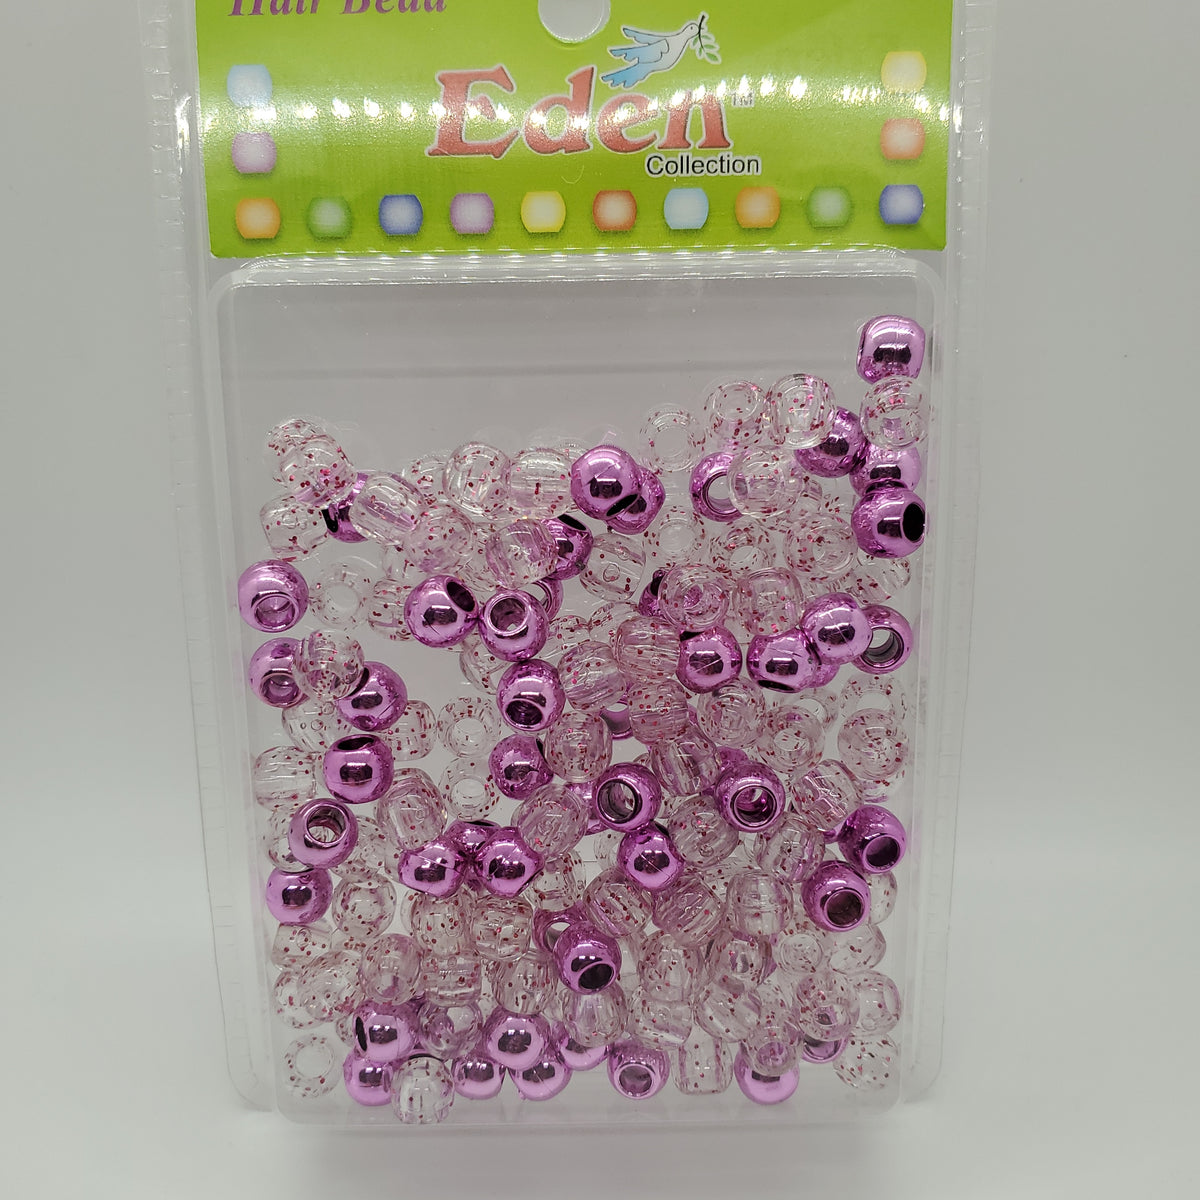 Eden Pink Beads – Hair Couture Online